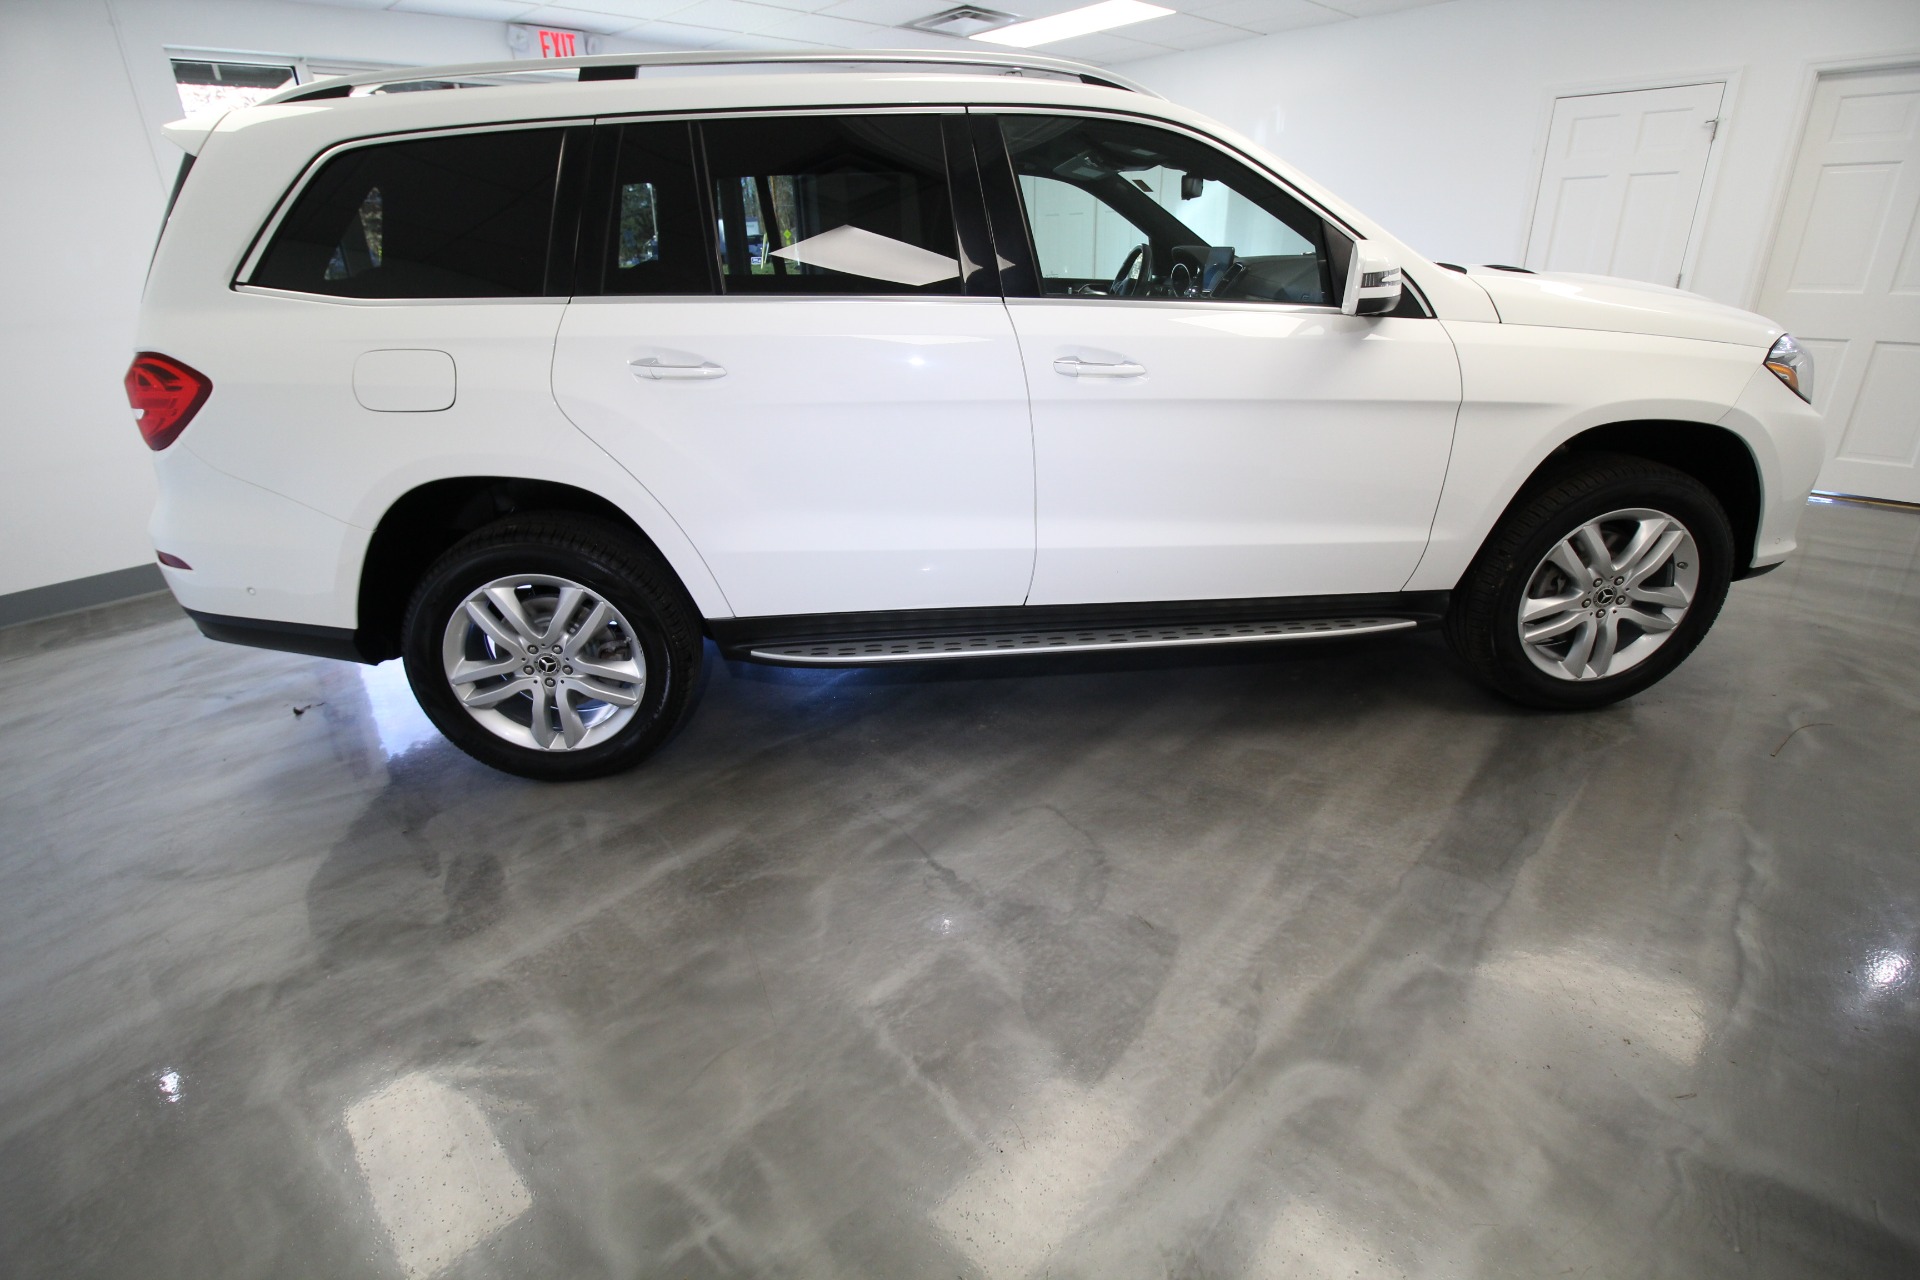 Used 2017 Polar White Mercedes-Benz GLS-Class GLS450 4MATIC LOADED GLS | Albany, NY